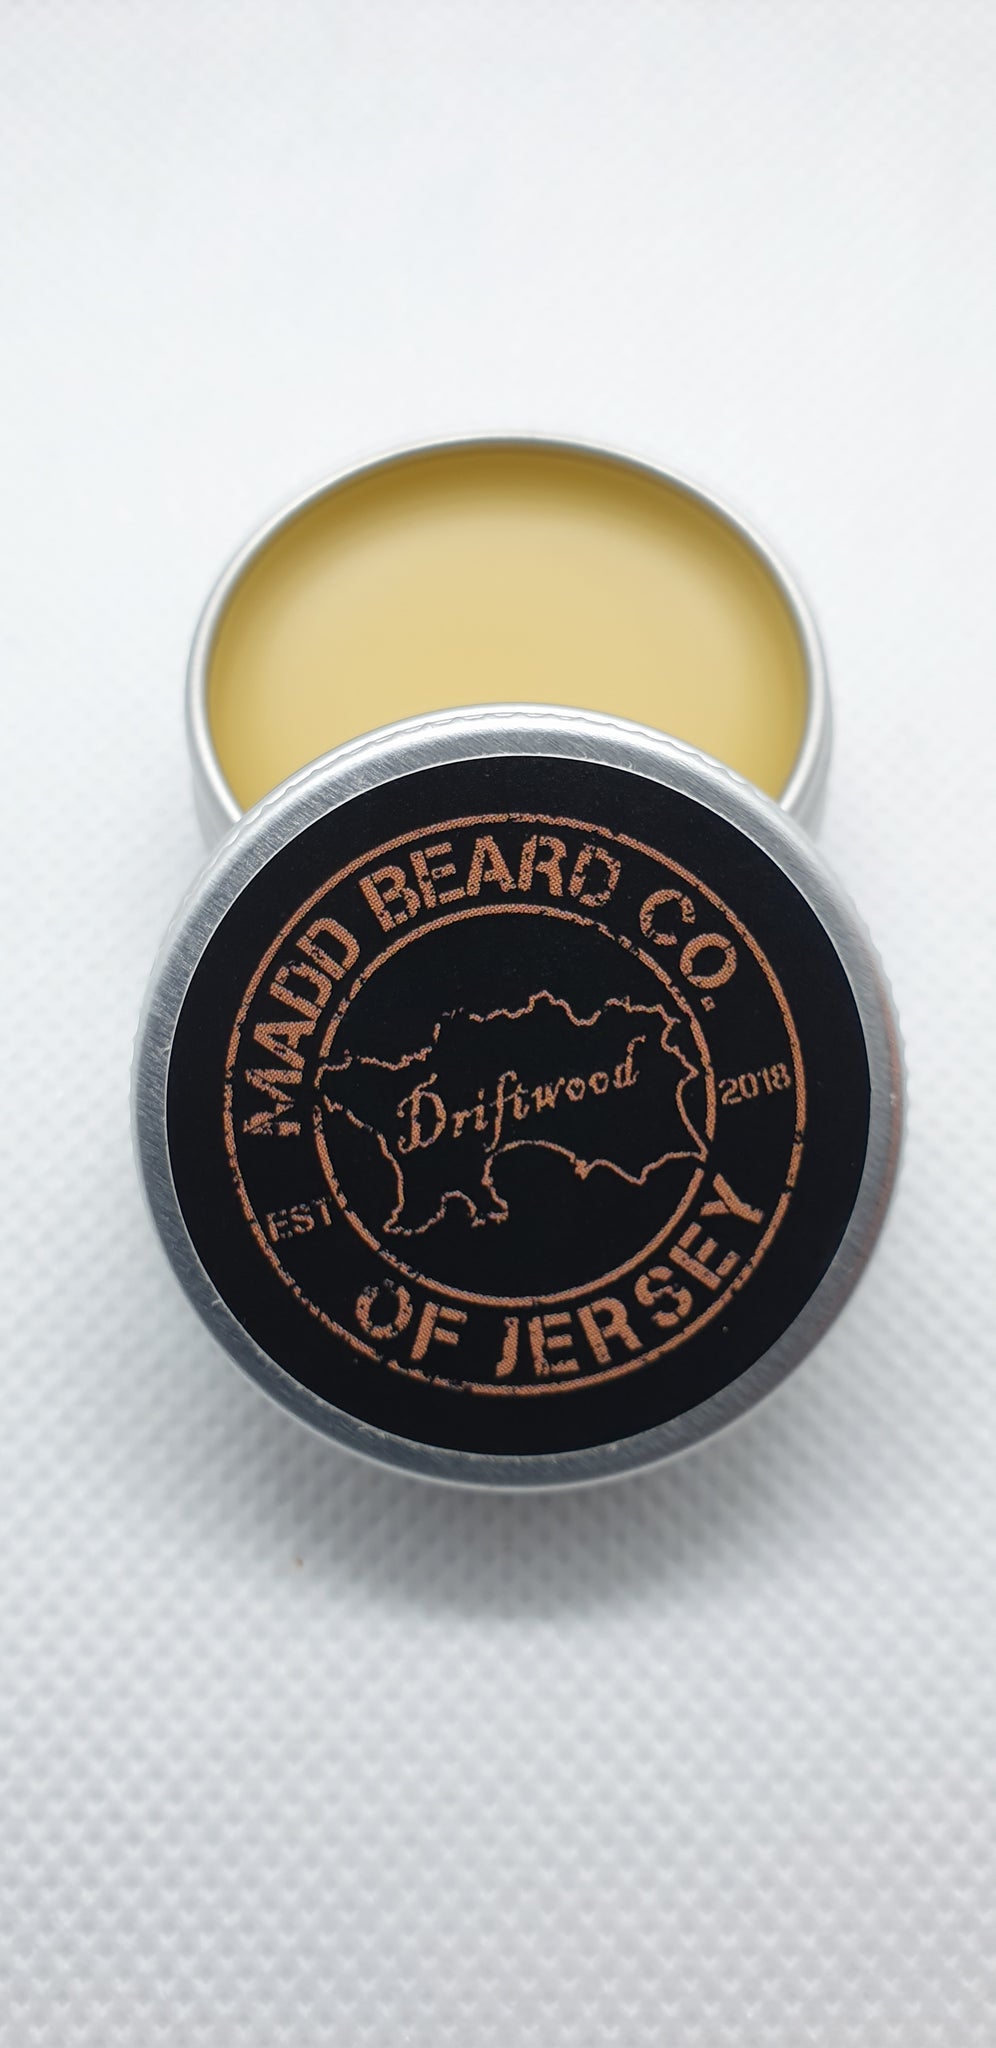 How to use moustache wax